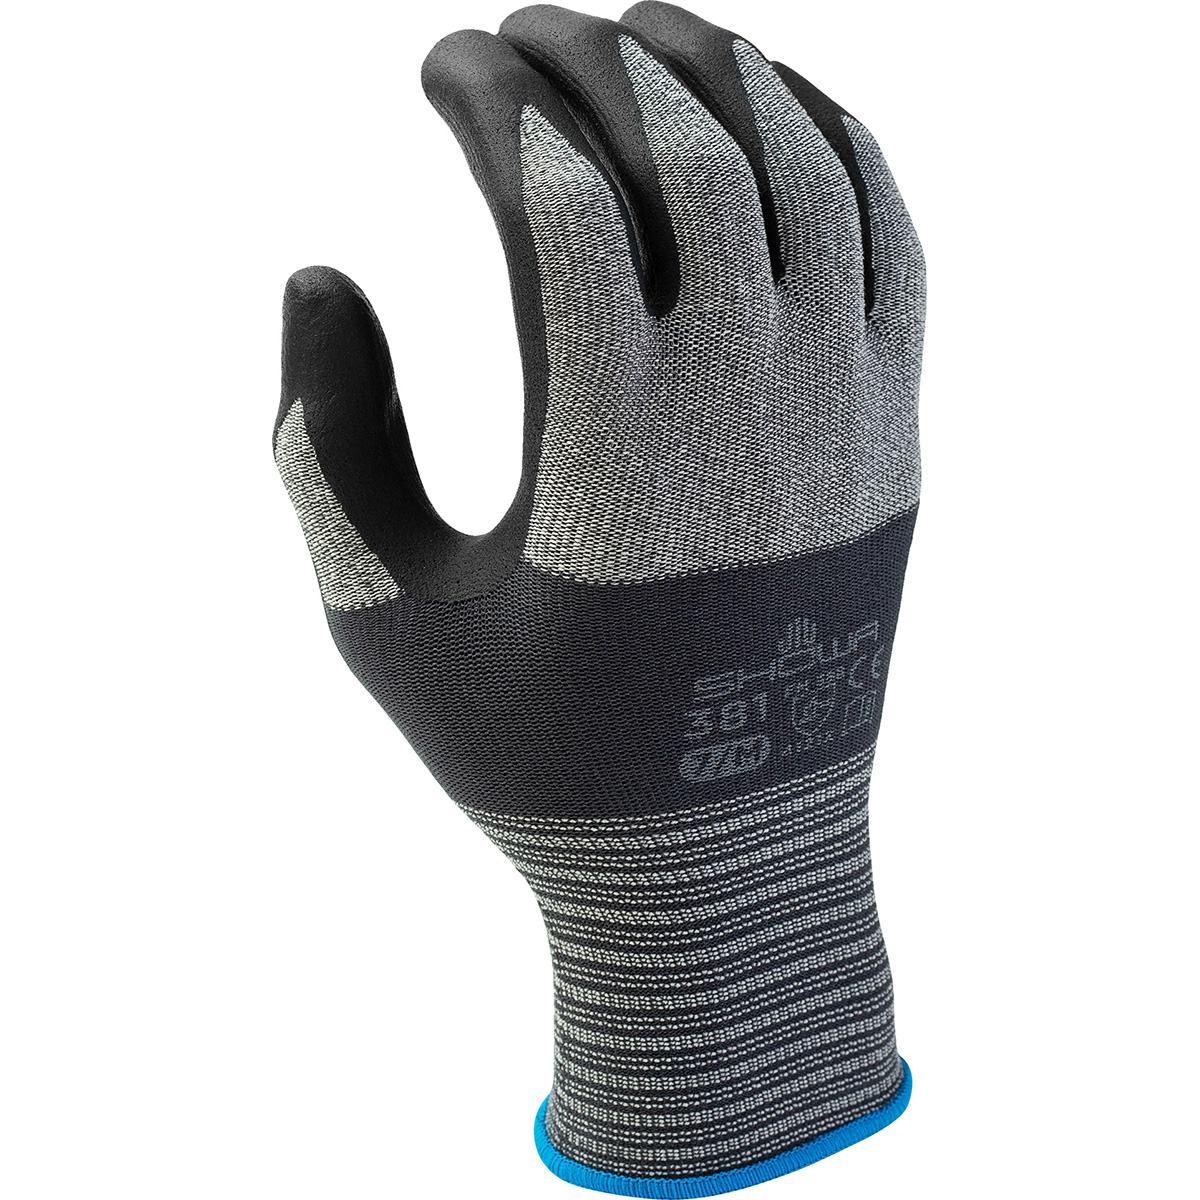 General purpose, "S" pattern foamed nitrile coated, grey /black coating, seamless, breathable microfiber knit liner, small